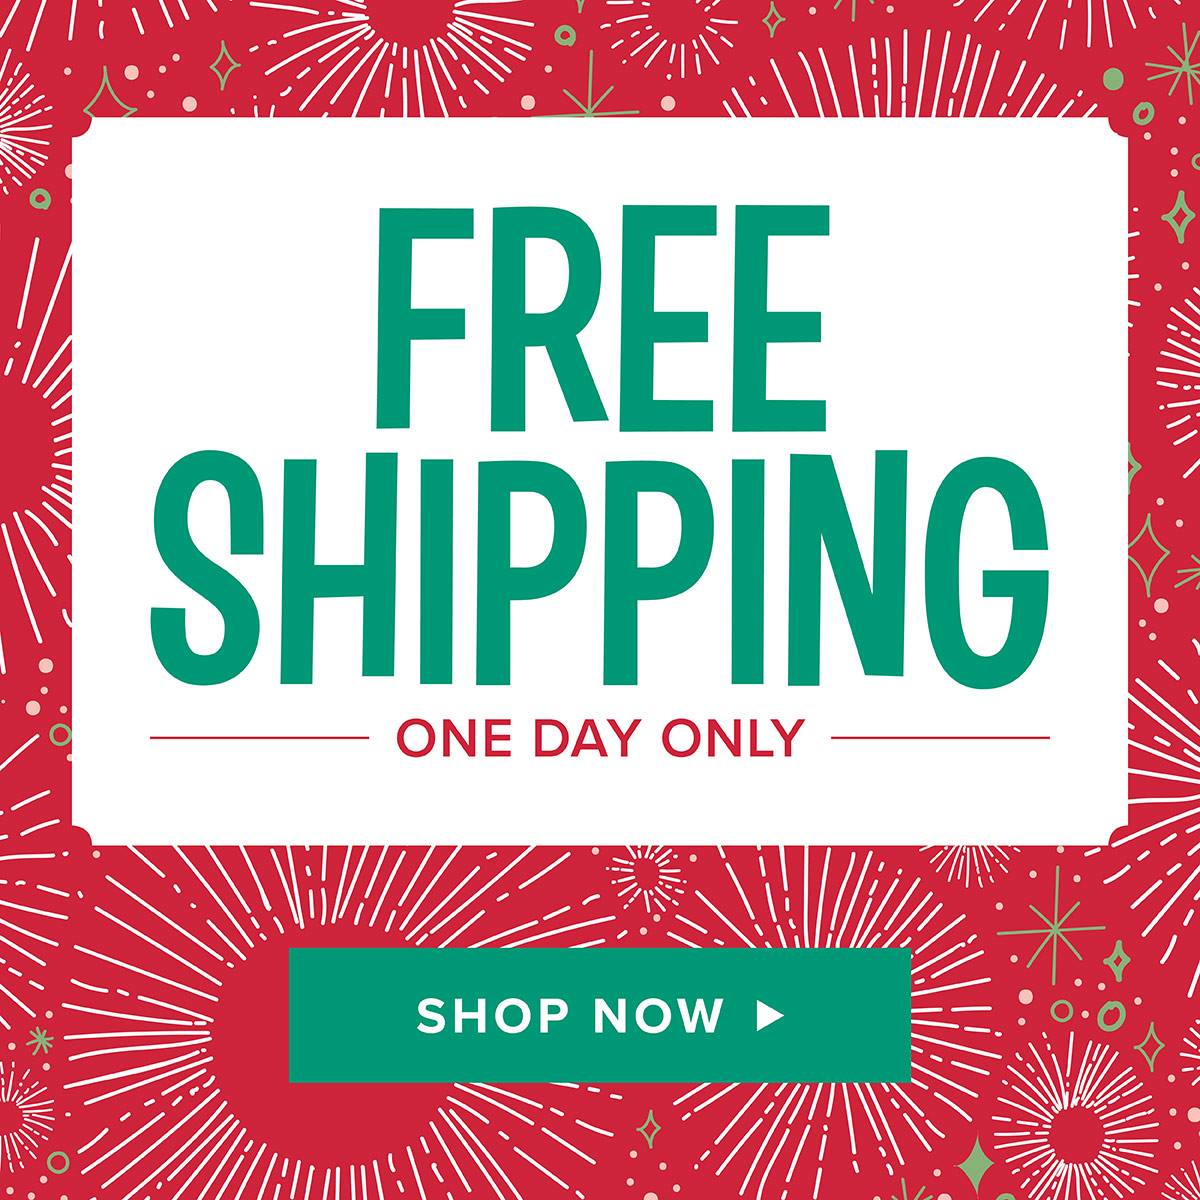 Crafts by Beth: FREE SHIPPING AT STAMPIN' UP!